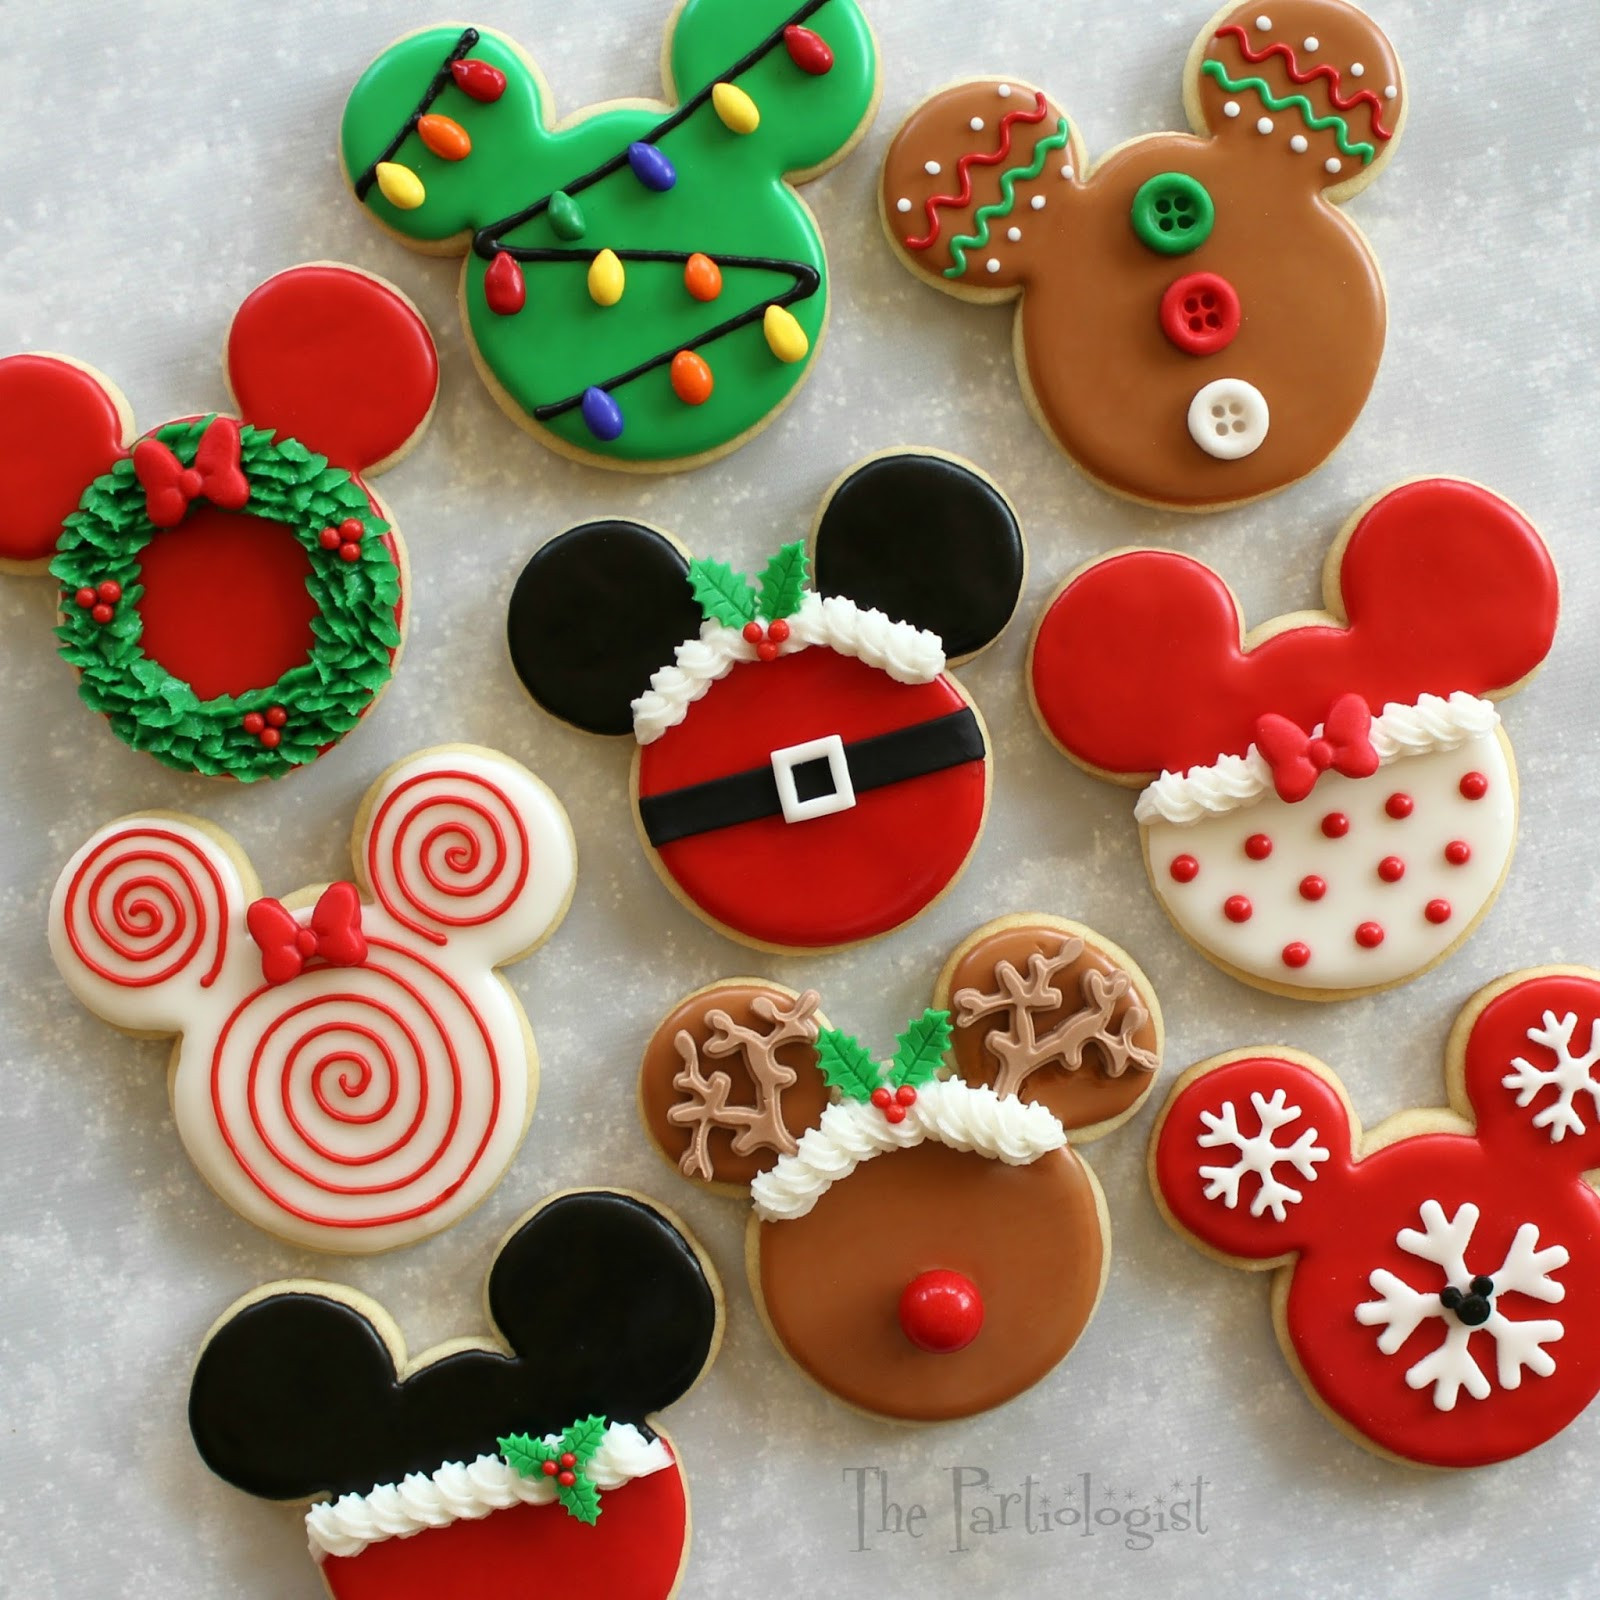 Iced Christmas Cookies
 The Partiologist Disney Themed Christmas Cookies